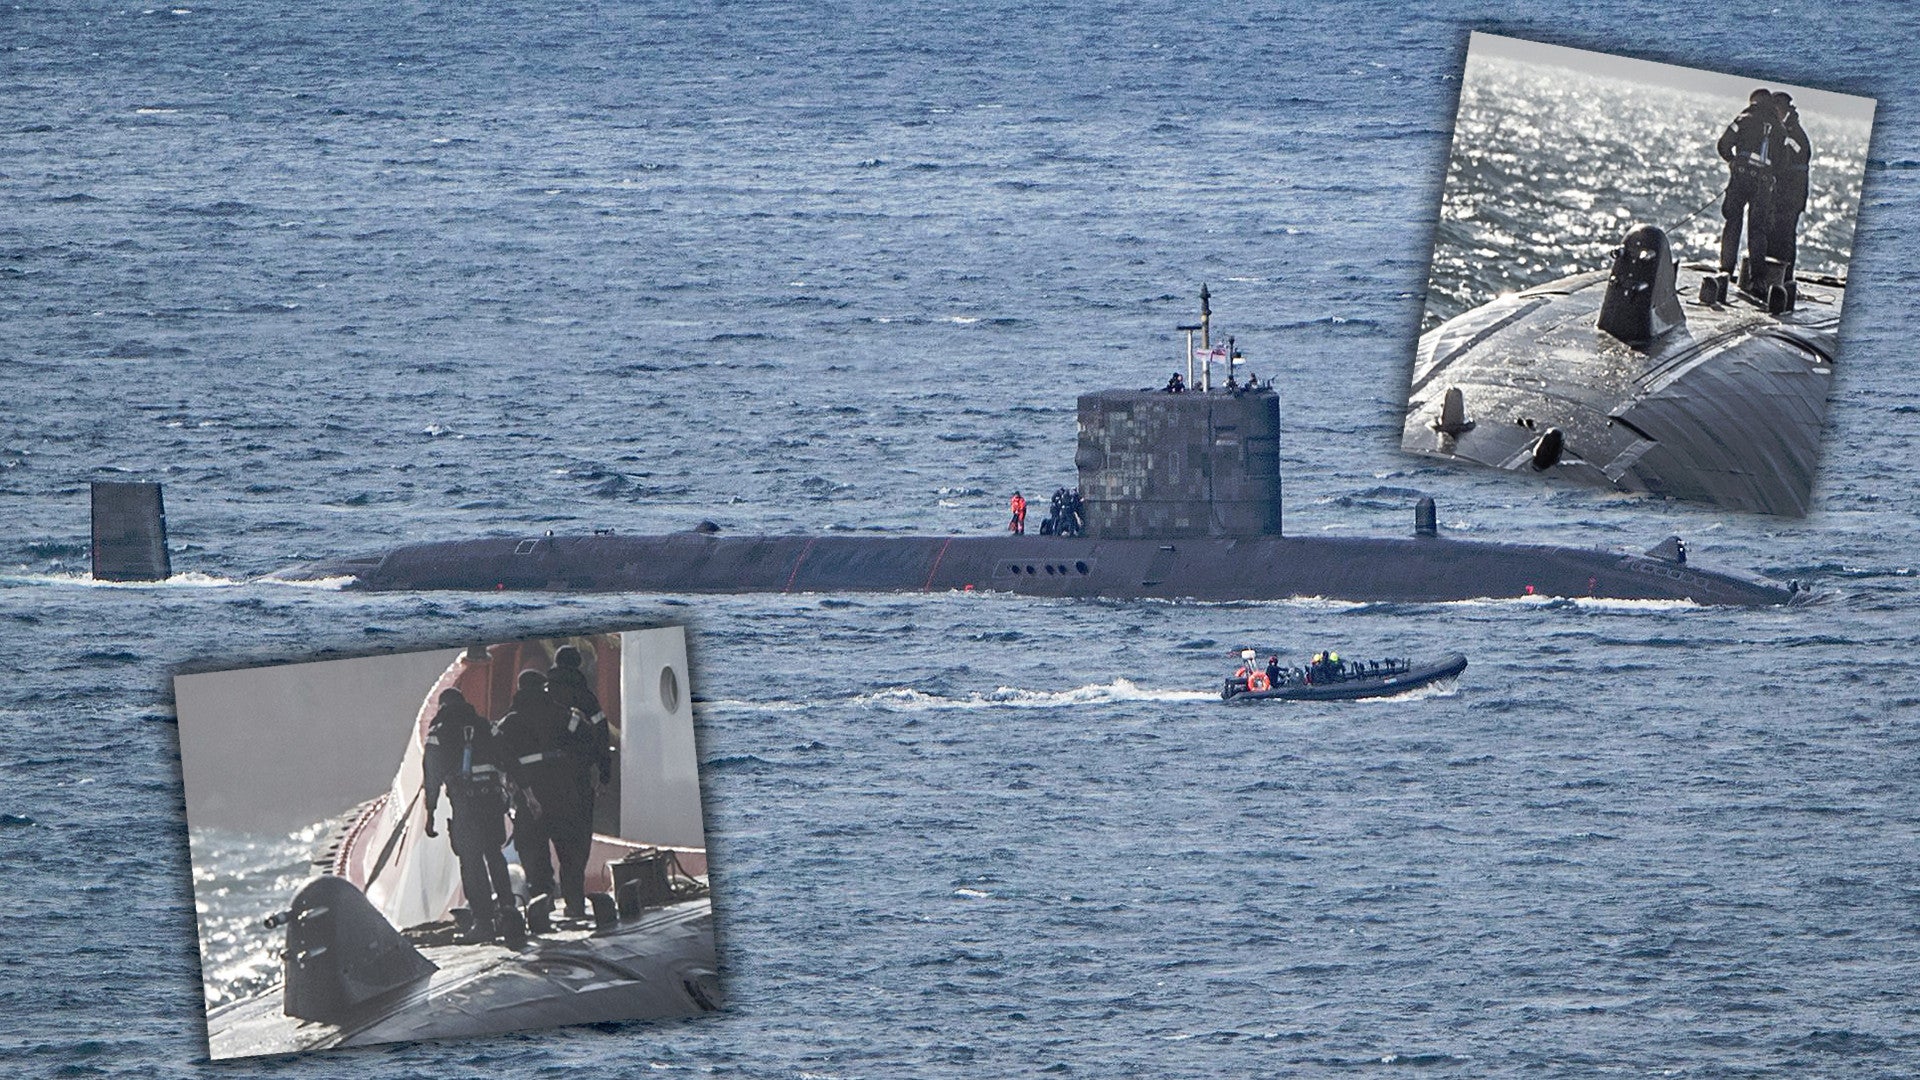 Royal Navy Sub Appears In Gibraltar Equipped With A Wake Detection System